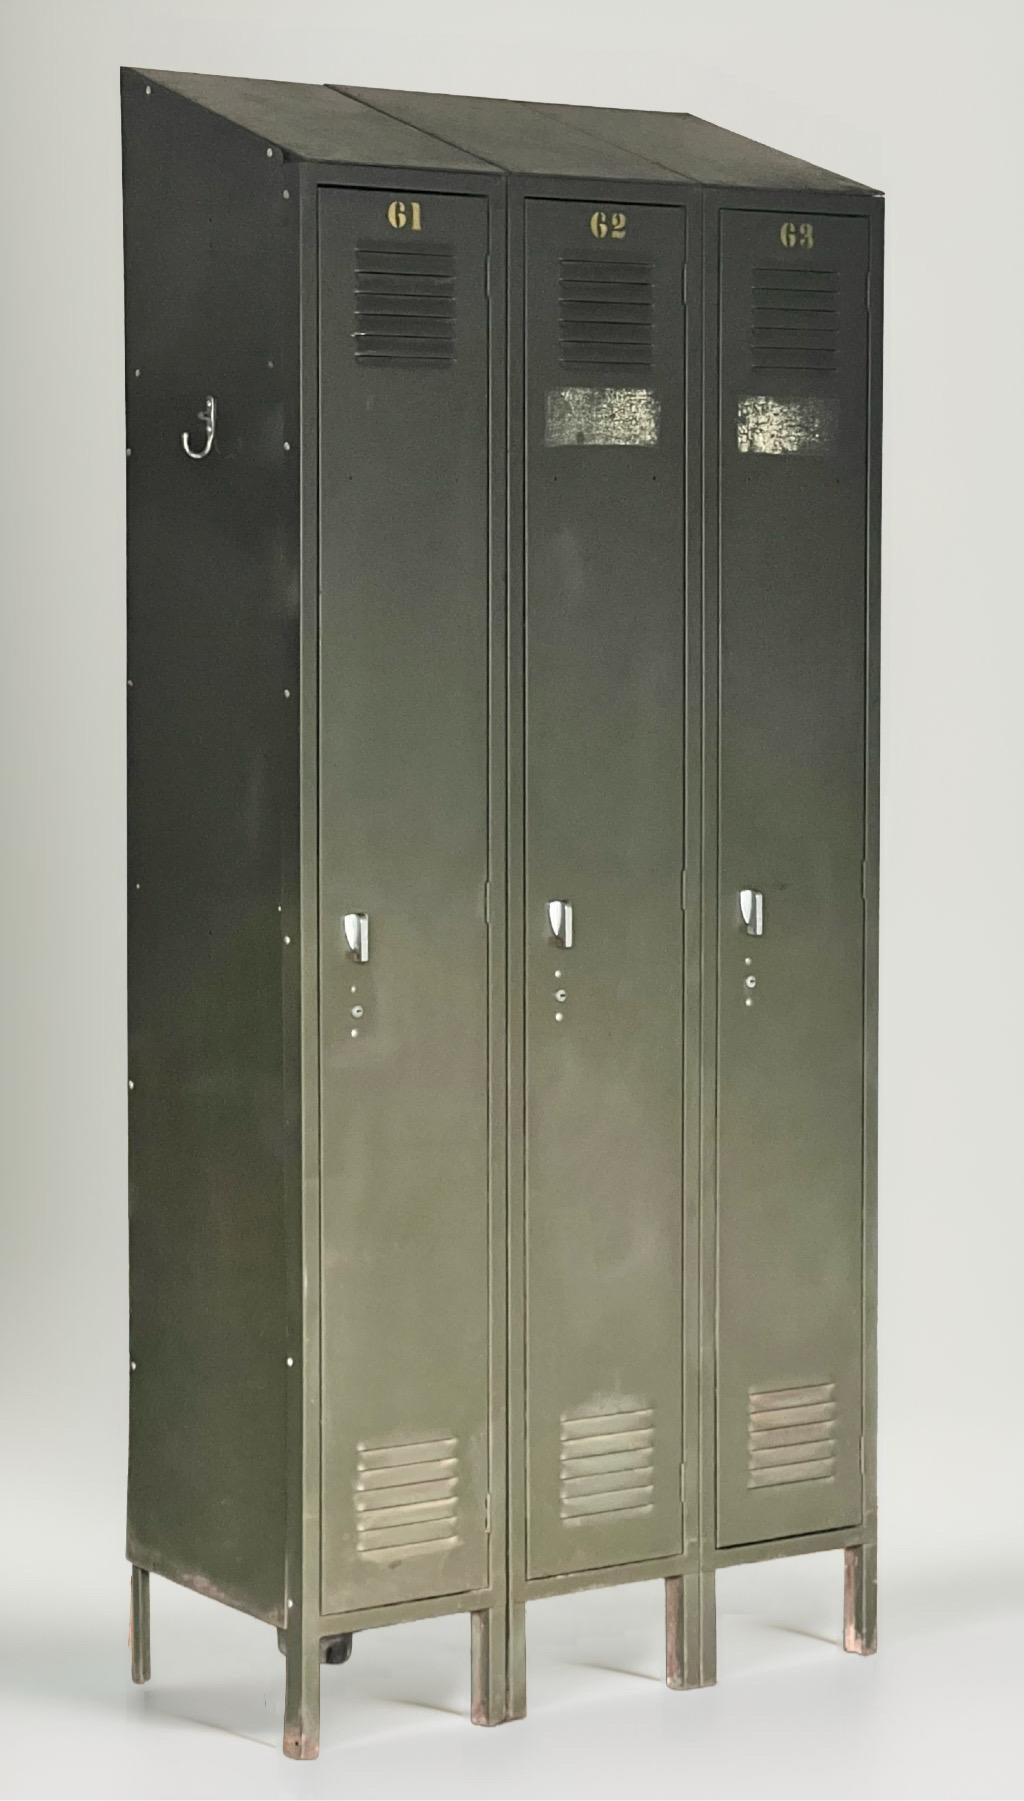 Slope top steel industrial army green locker by Lyon Metal, c. 1950s.

A single freestanding unit of three lockers made of heavy gauge enameled steel by America's leading manufacturer of industrial steel storage products since 1901. Each one